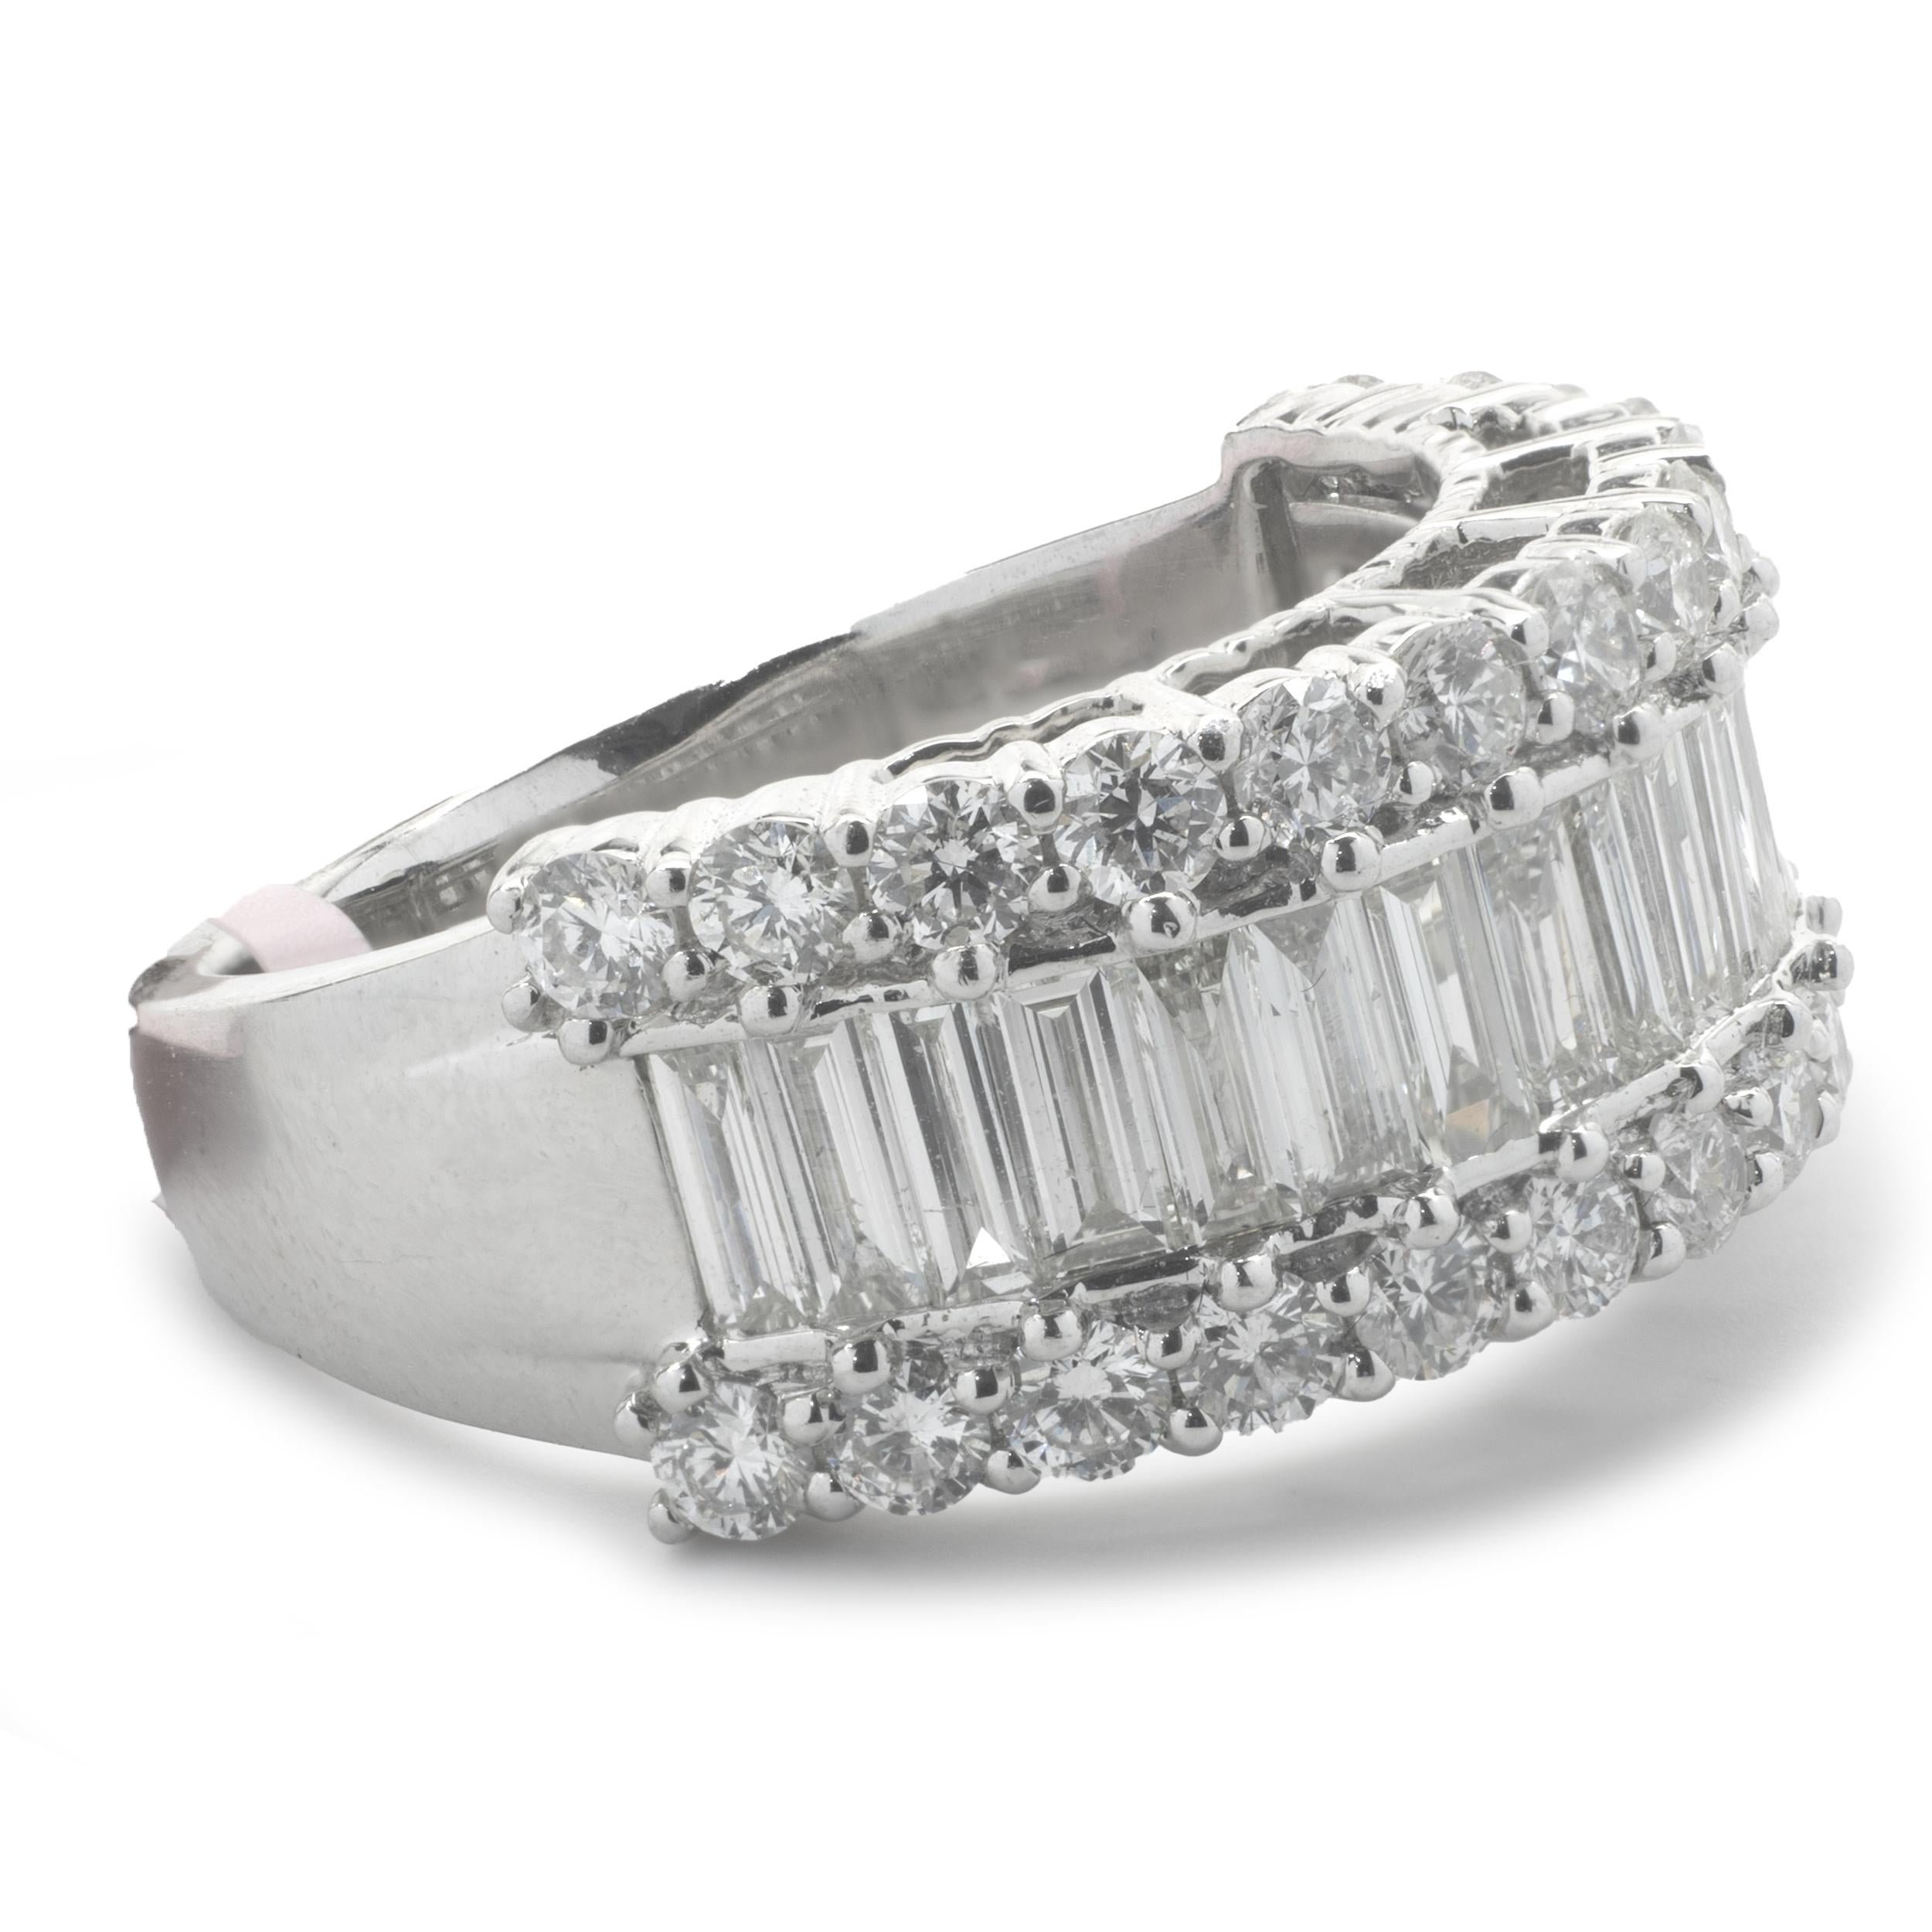 Designer: custom
Material: 14K white gold
Diamond: 48 round brilliant and baguette diamonds= 2.69cttw
Color: G
Clarity: VS
Ring size: 7.5 (please allow two additional shipping days for sizing requests)
Weight:  8.6 grams
